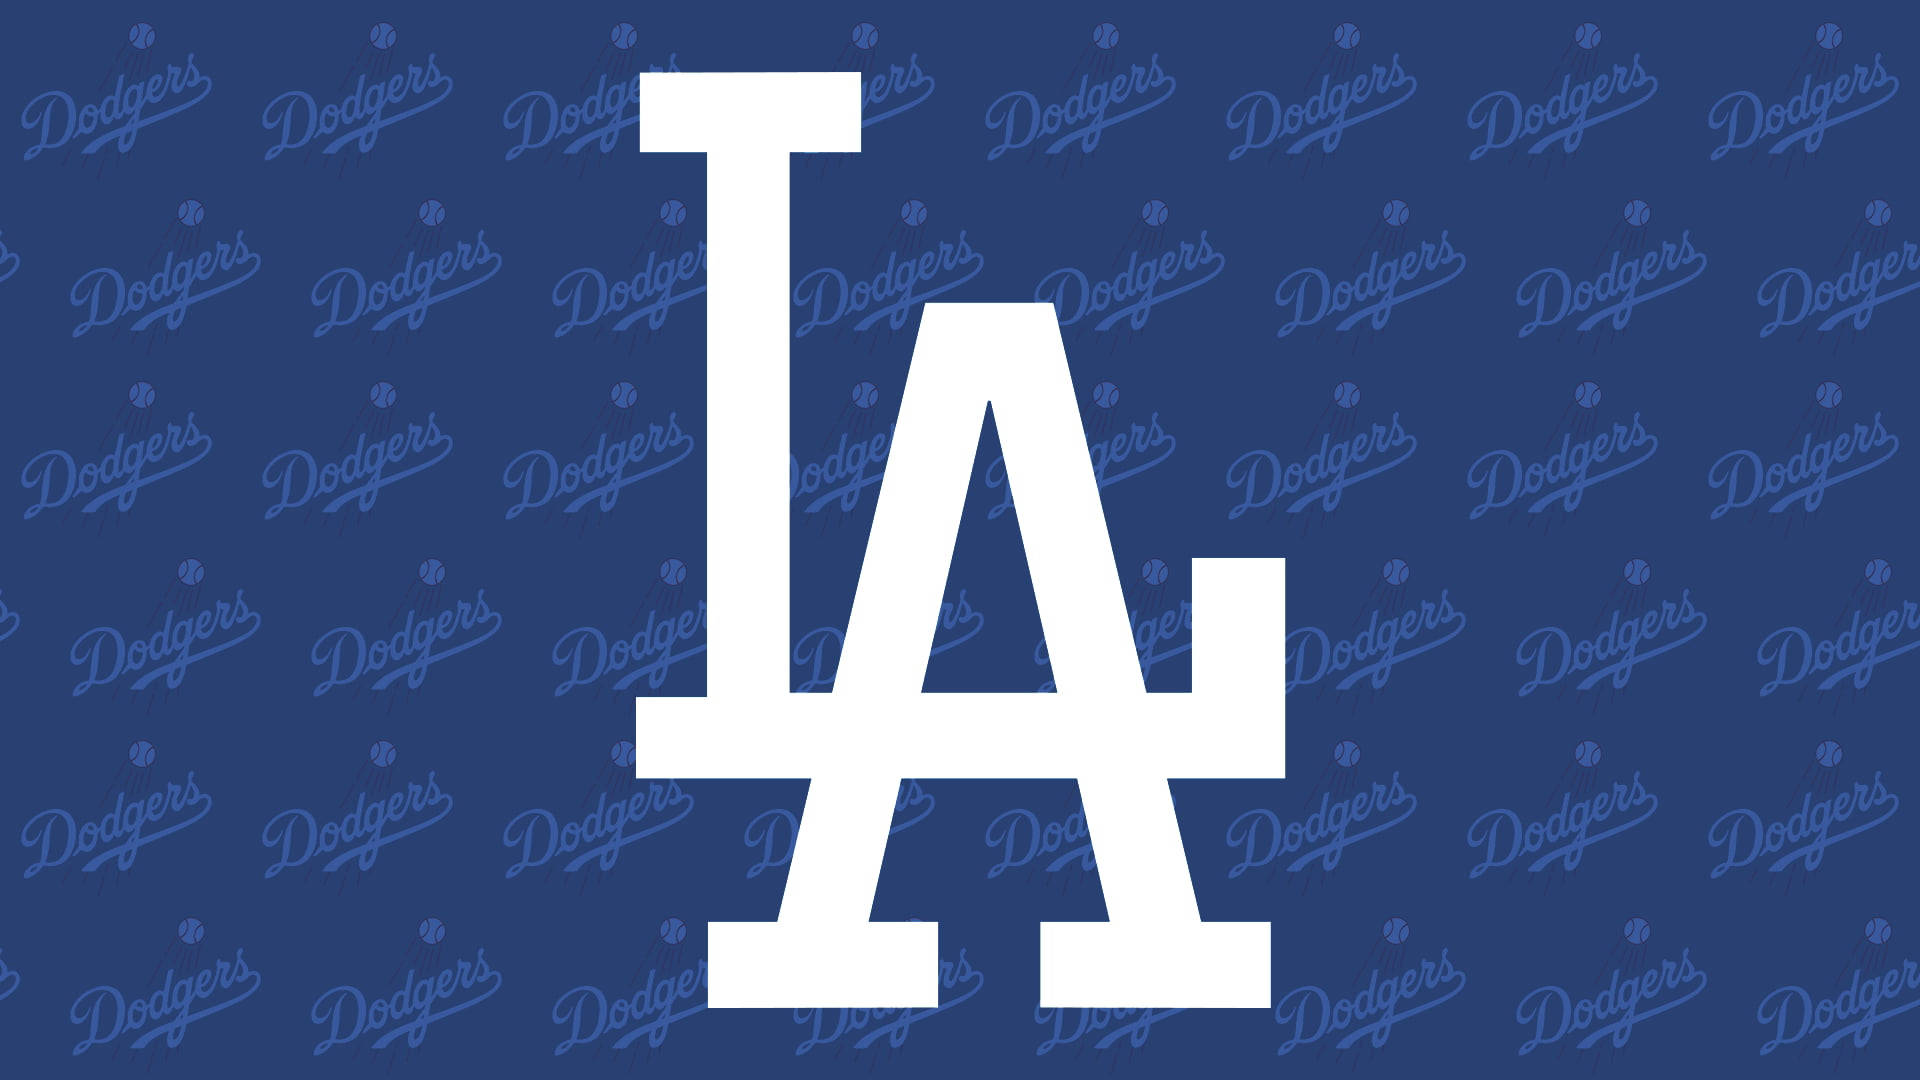 Dodgers 1920X1080 Wallpaper and Background Image